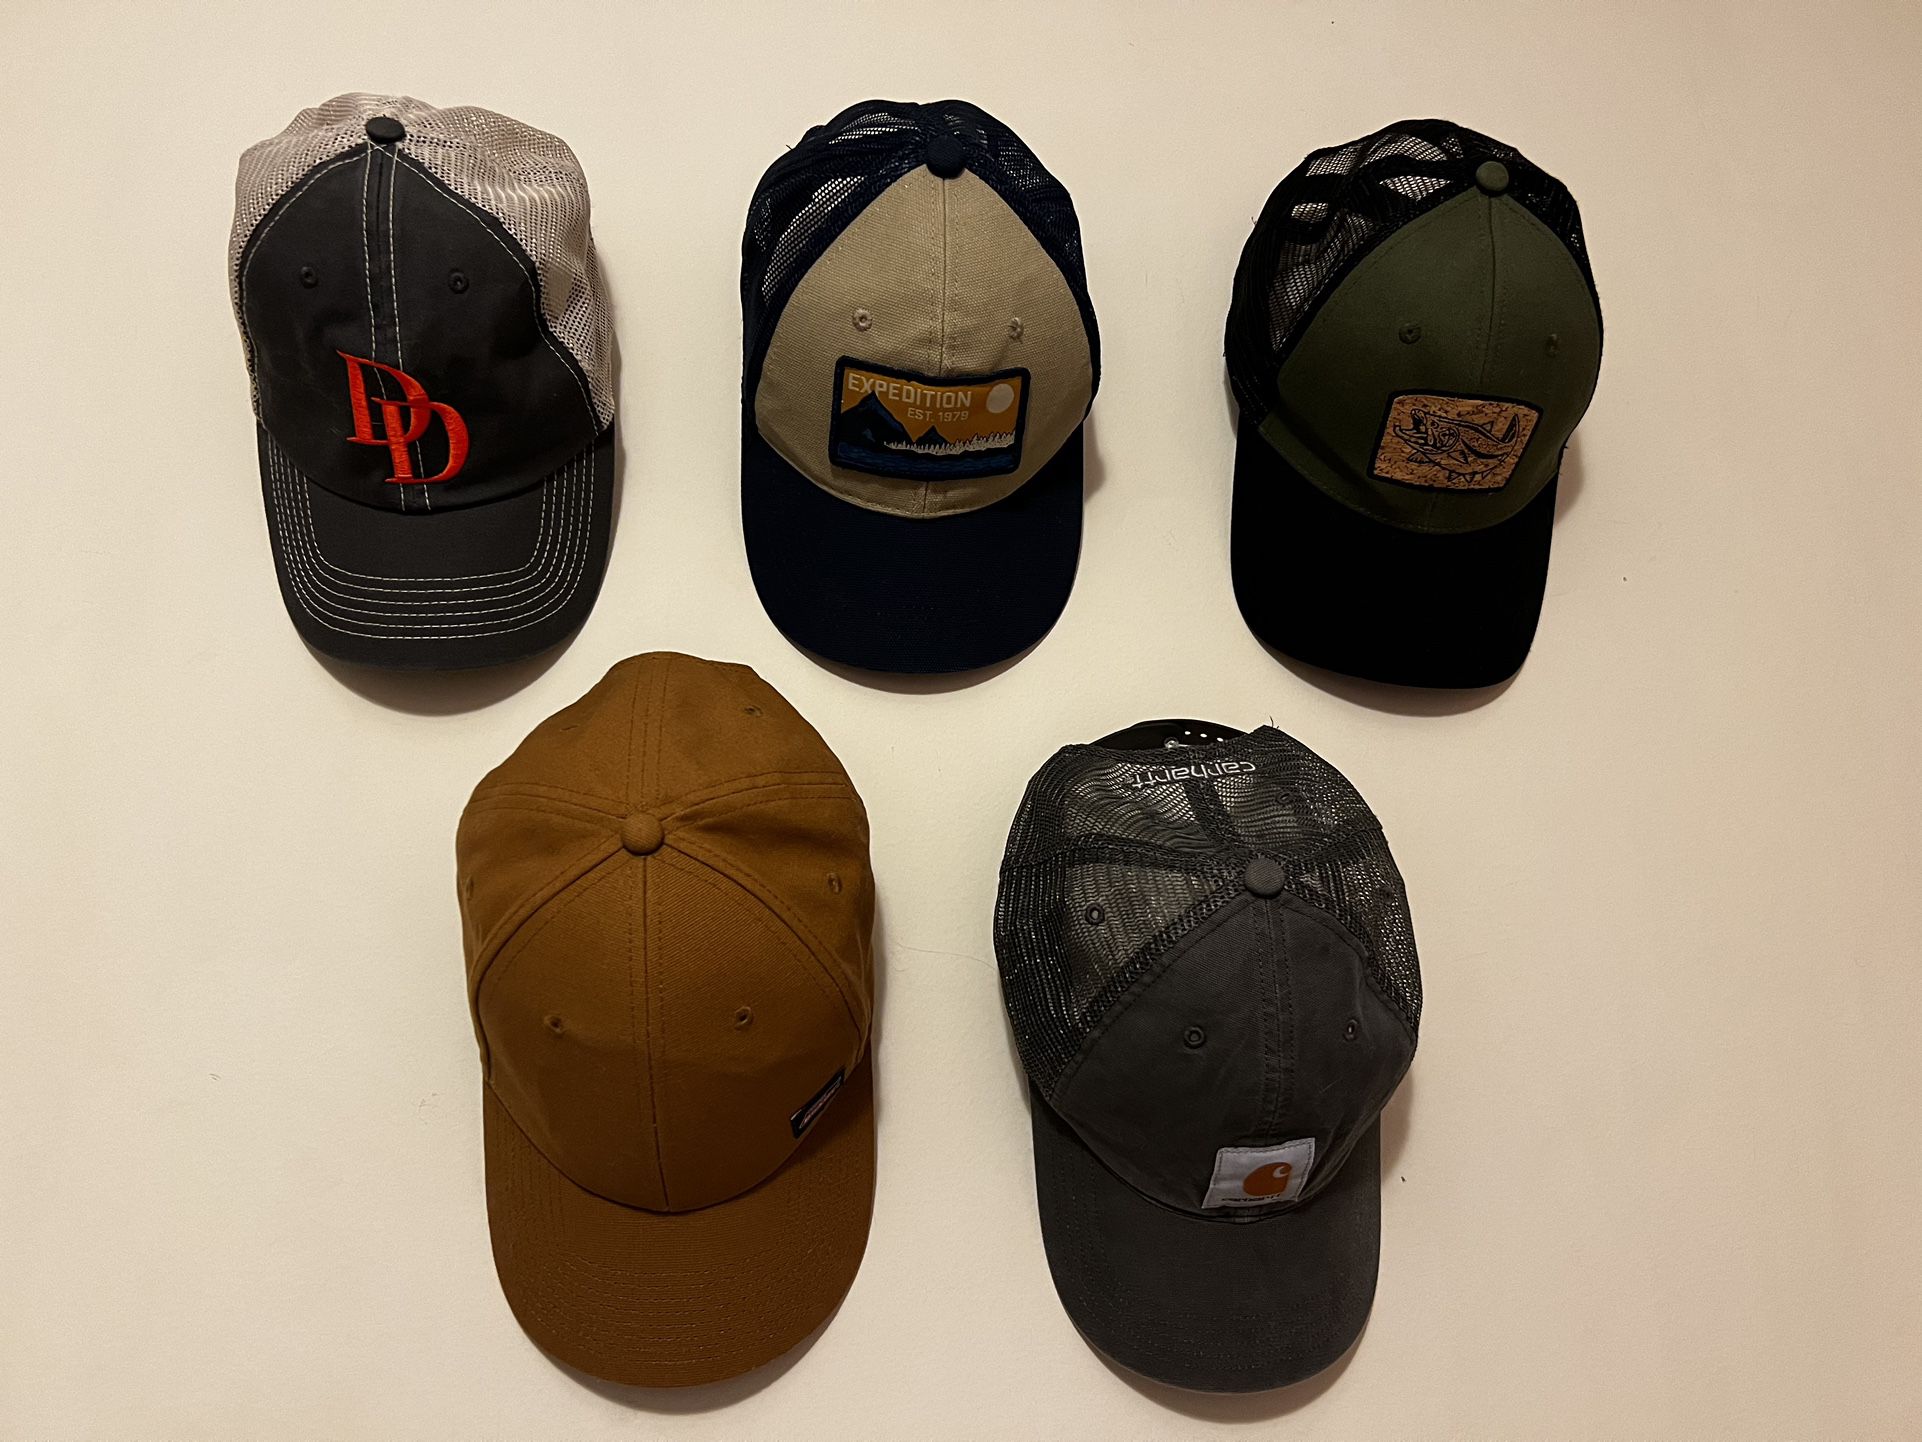 Different Variety Of Hats